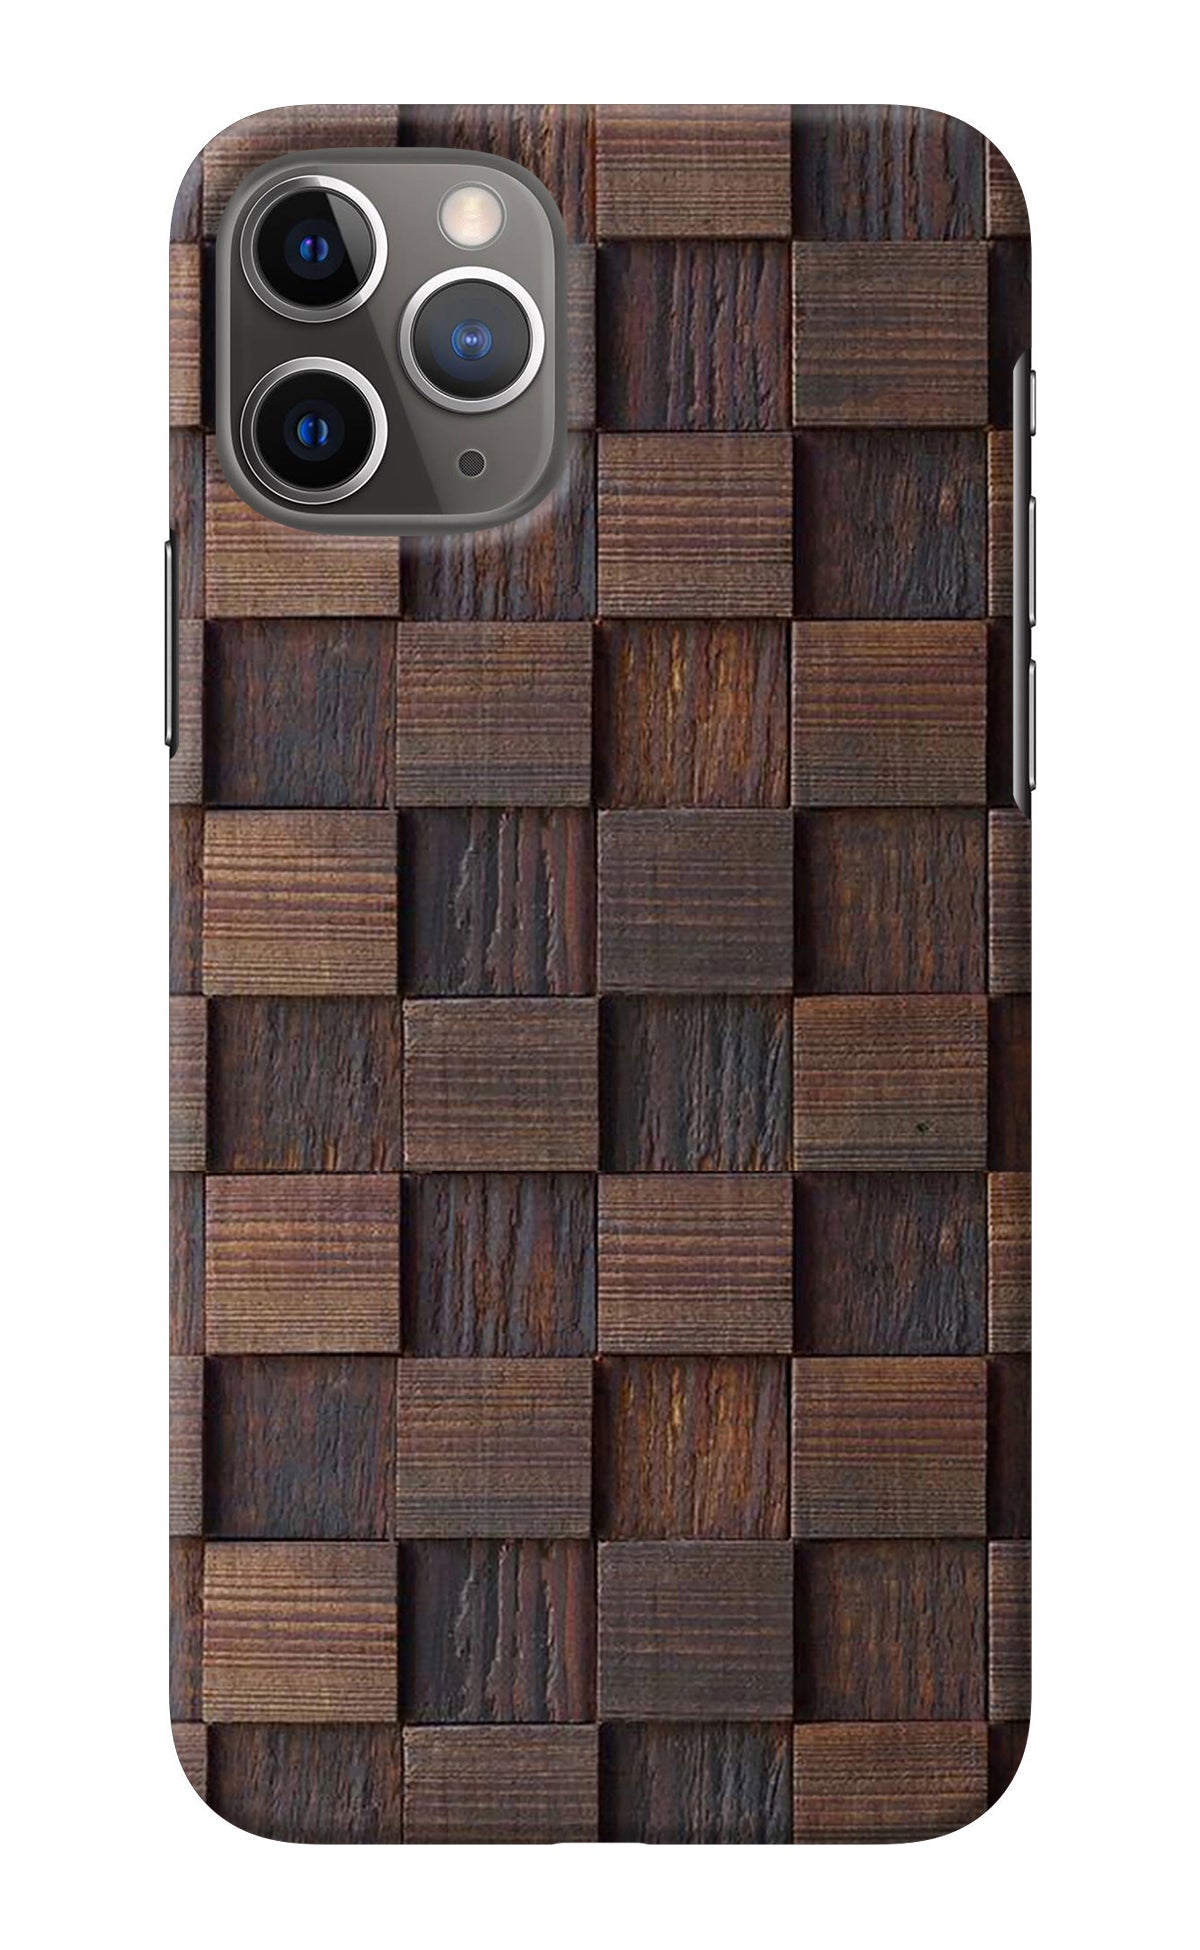 Wooden Cube Design iPhone 11 Pro Back Cover